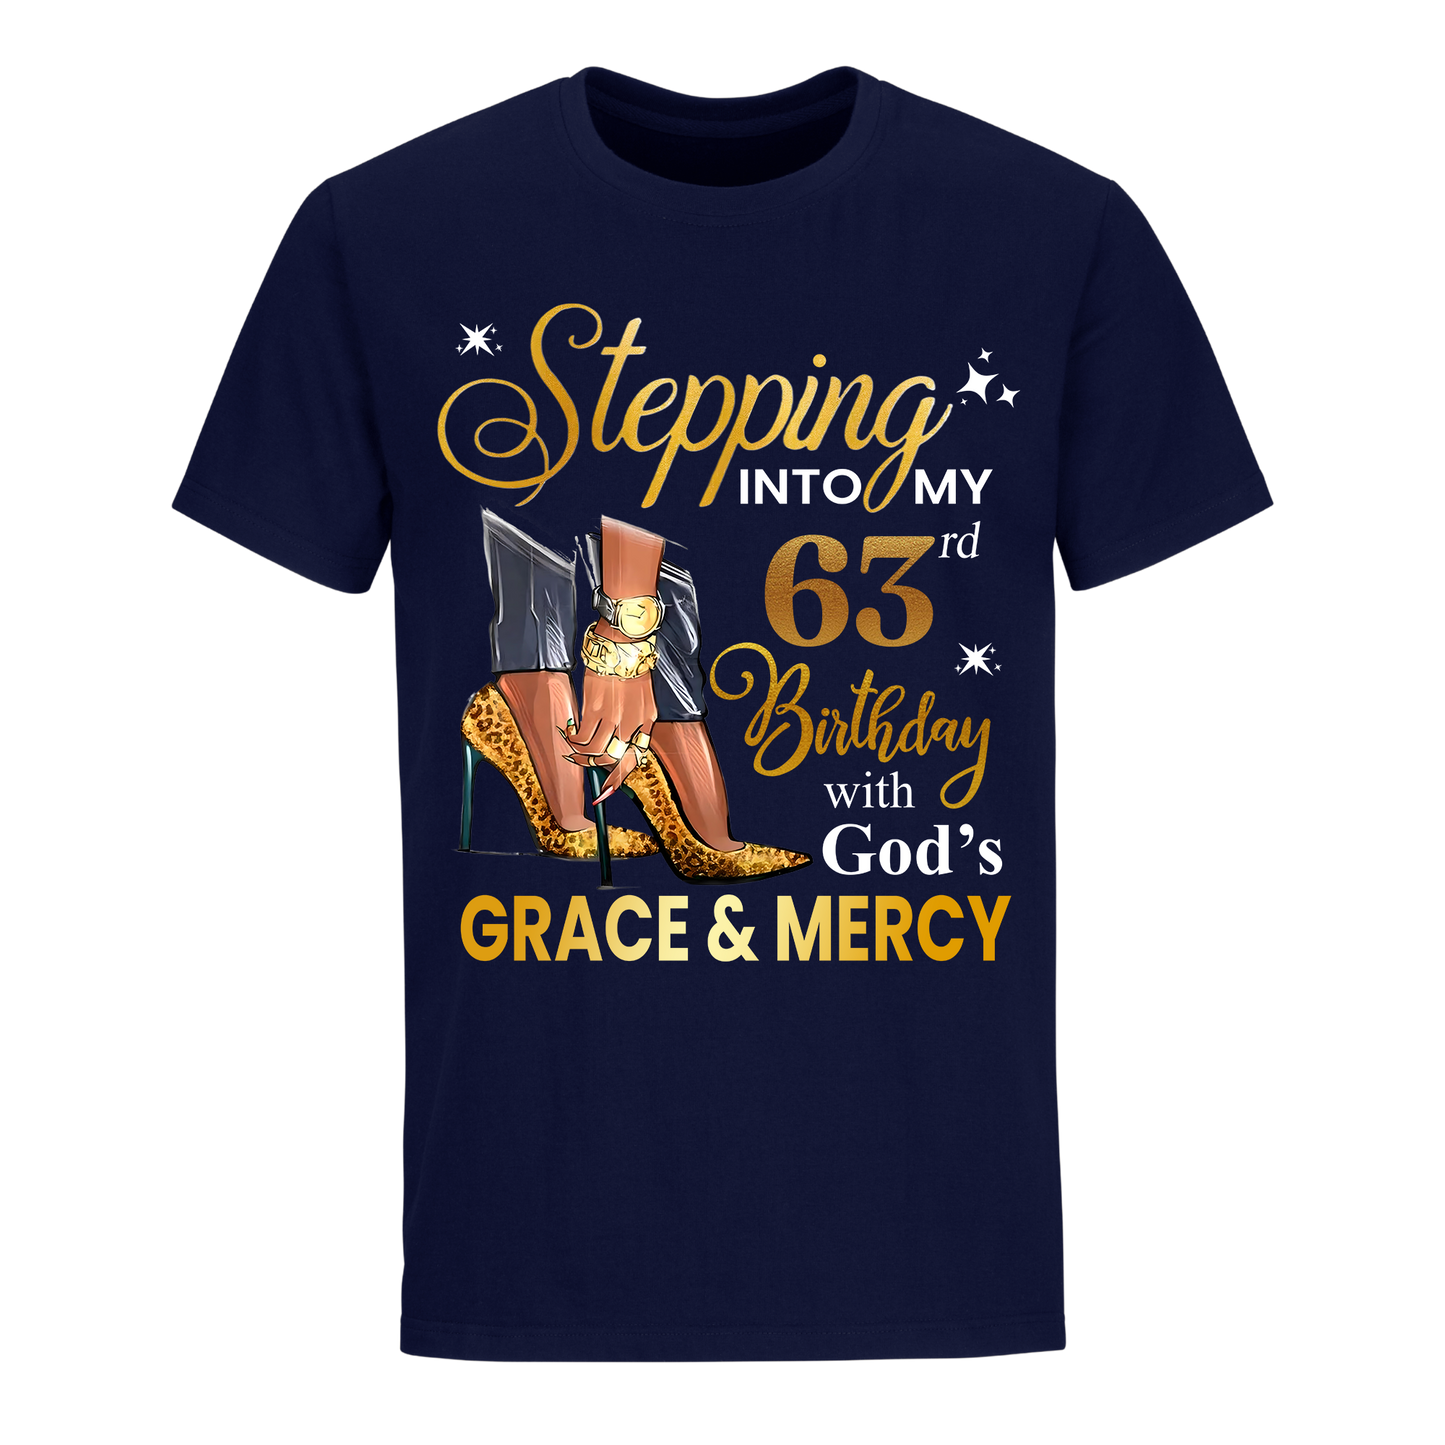 STEPPING INTO MY GRACE AND MERCY 63RD BIRTHDAY UNISEX SHIRT